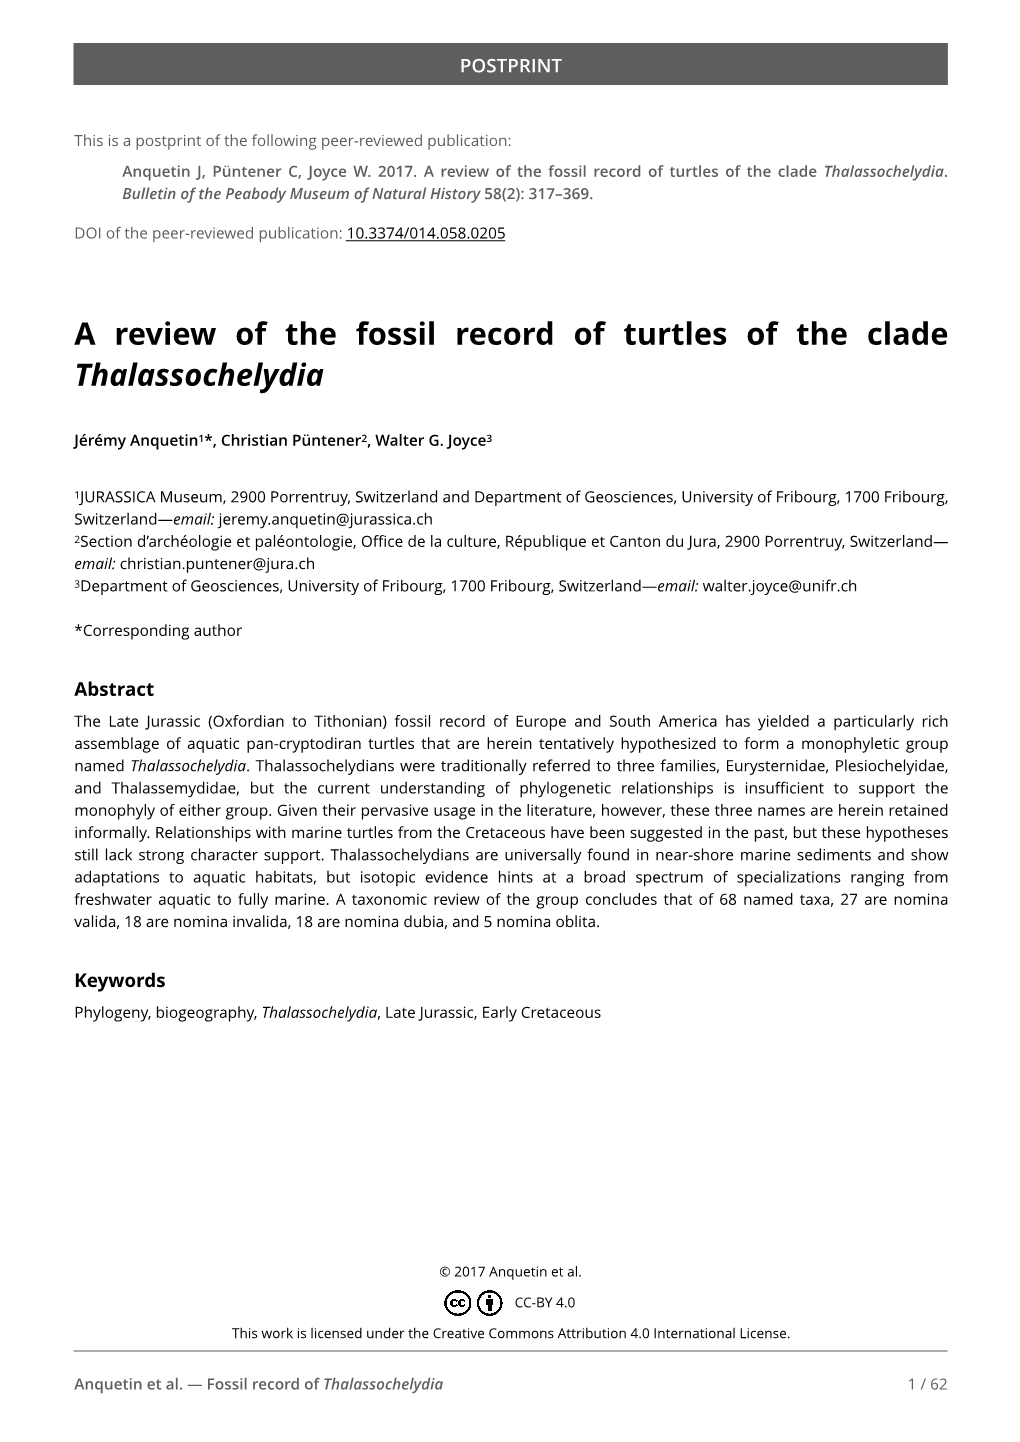 A Review of the Fossil Record of Turtles of the Clade Thalassochelydia